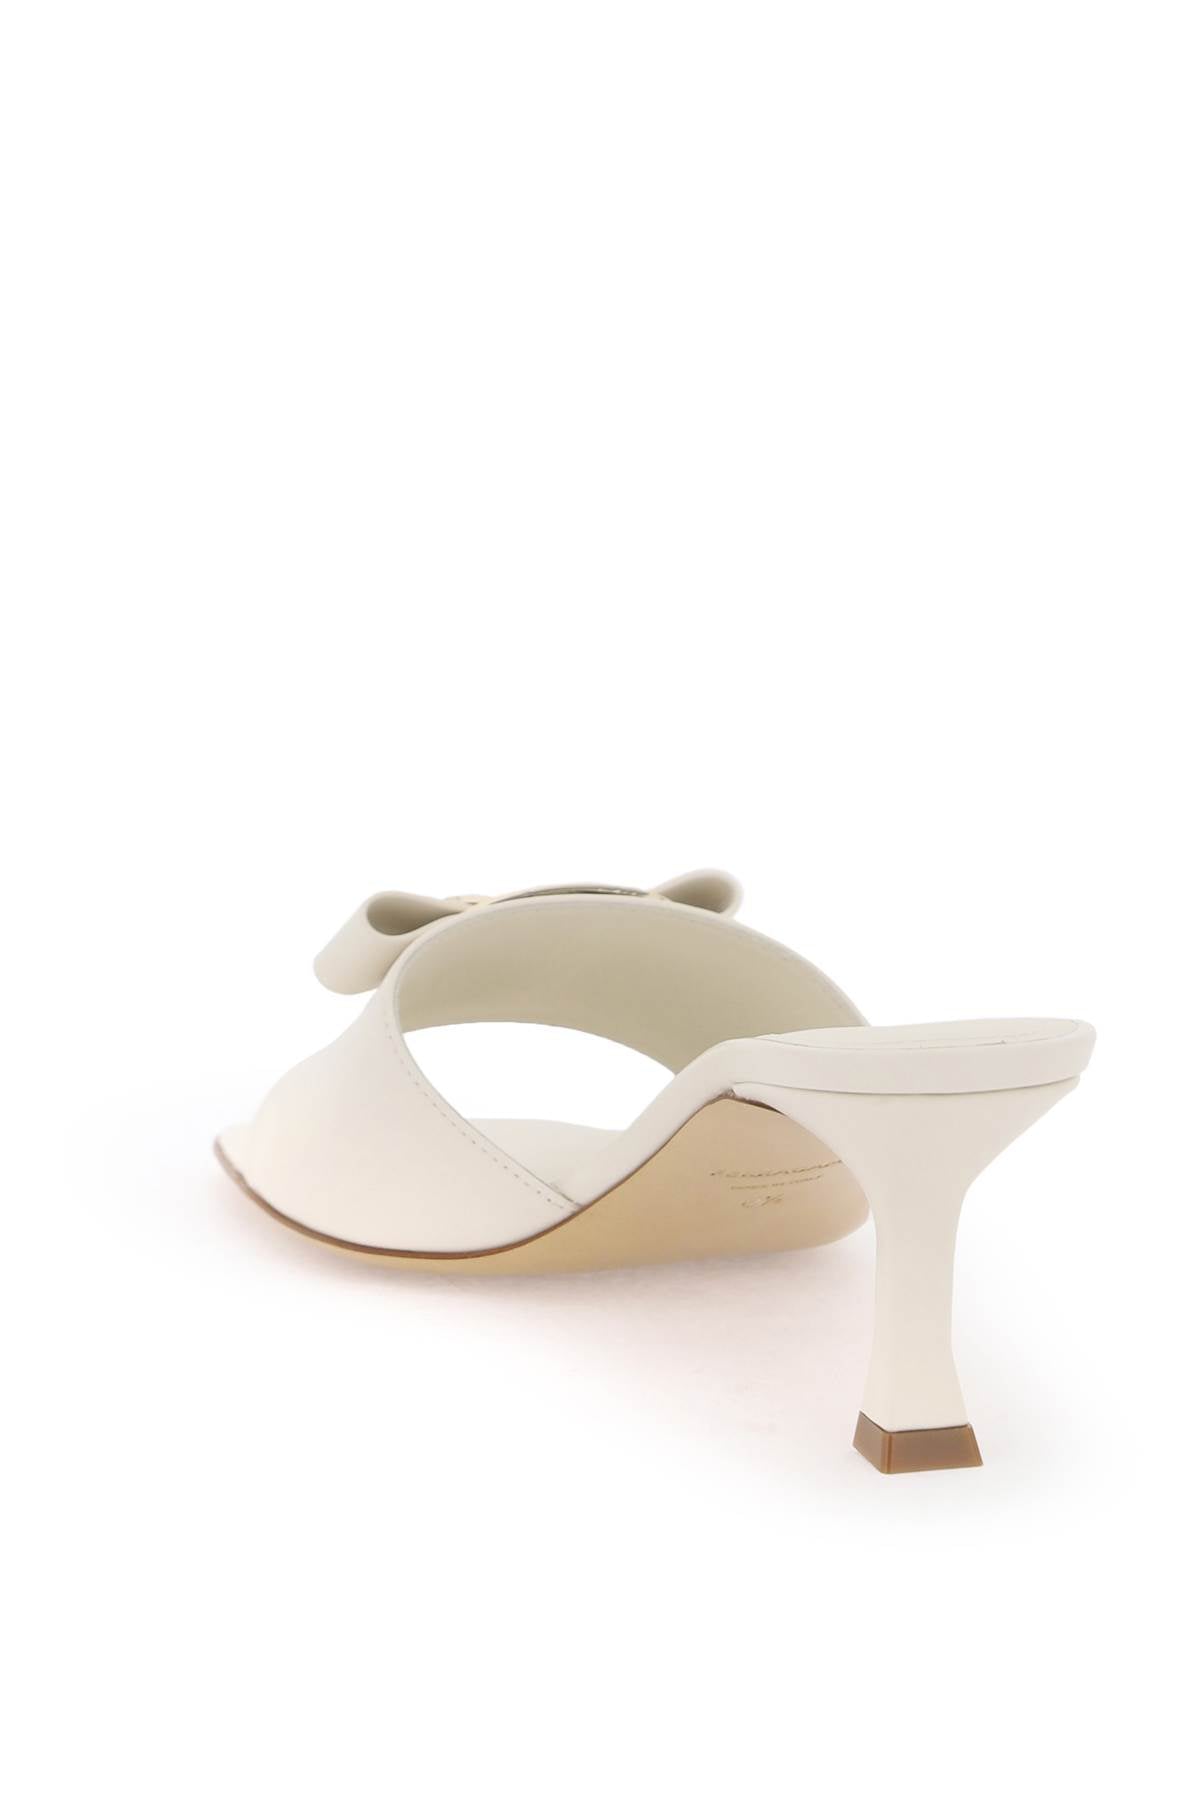 Shop Ferragamo Bow-accented Nappa Leather Flat Sandals For Women In White